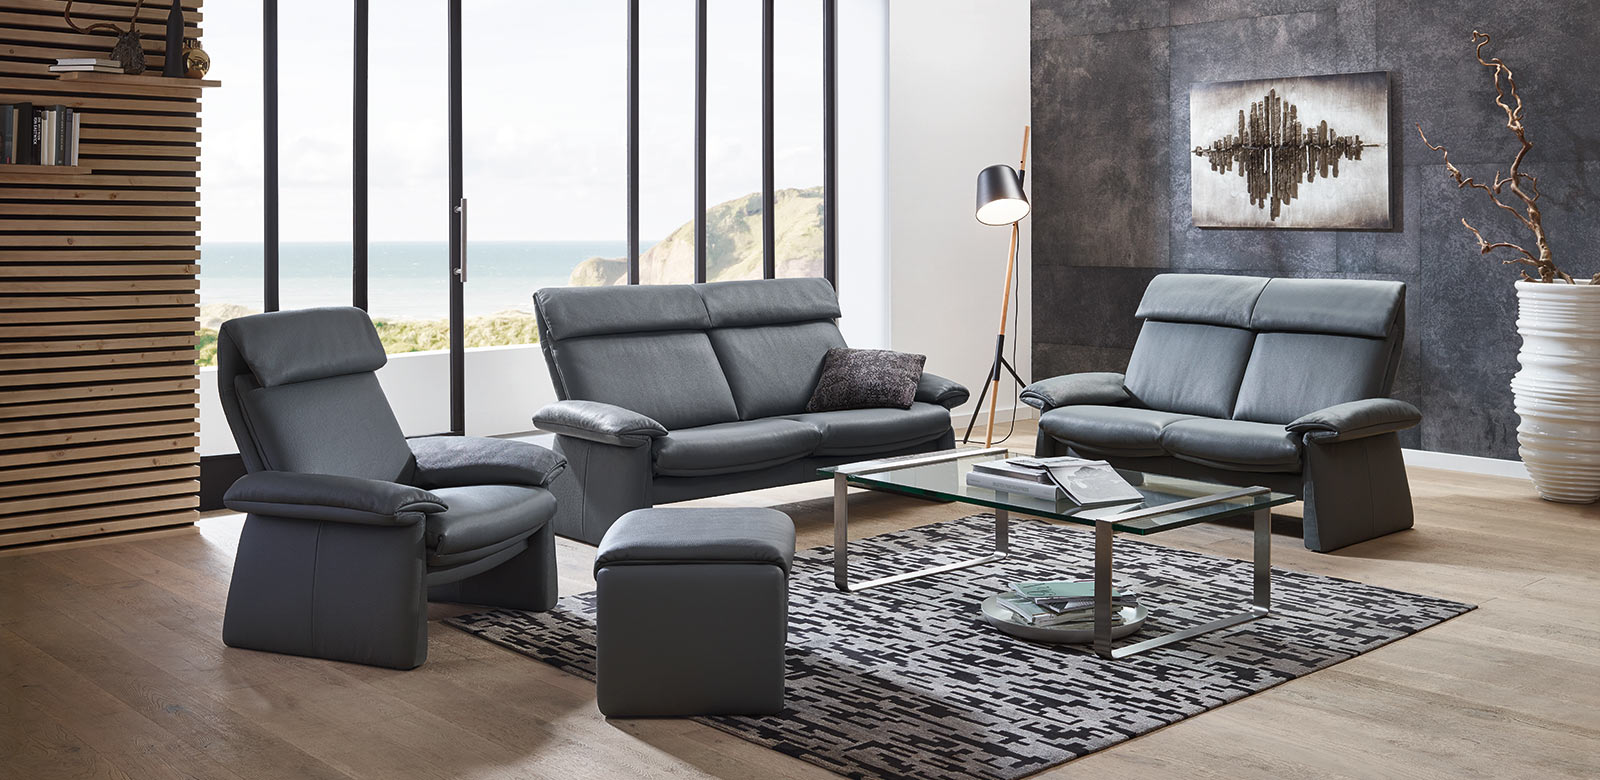 The flat shape and the fine, straight lines are proof of the design aspirations of this sofa with relax function, which is more up-to-date than ever. Combination of two sofas and armchair with stool in modern beach villa.